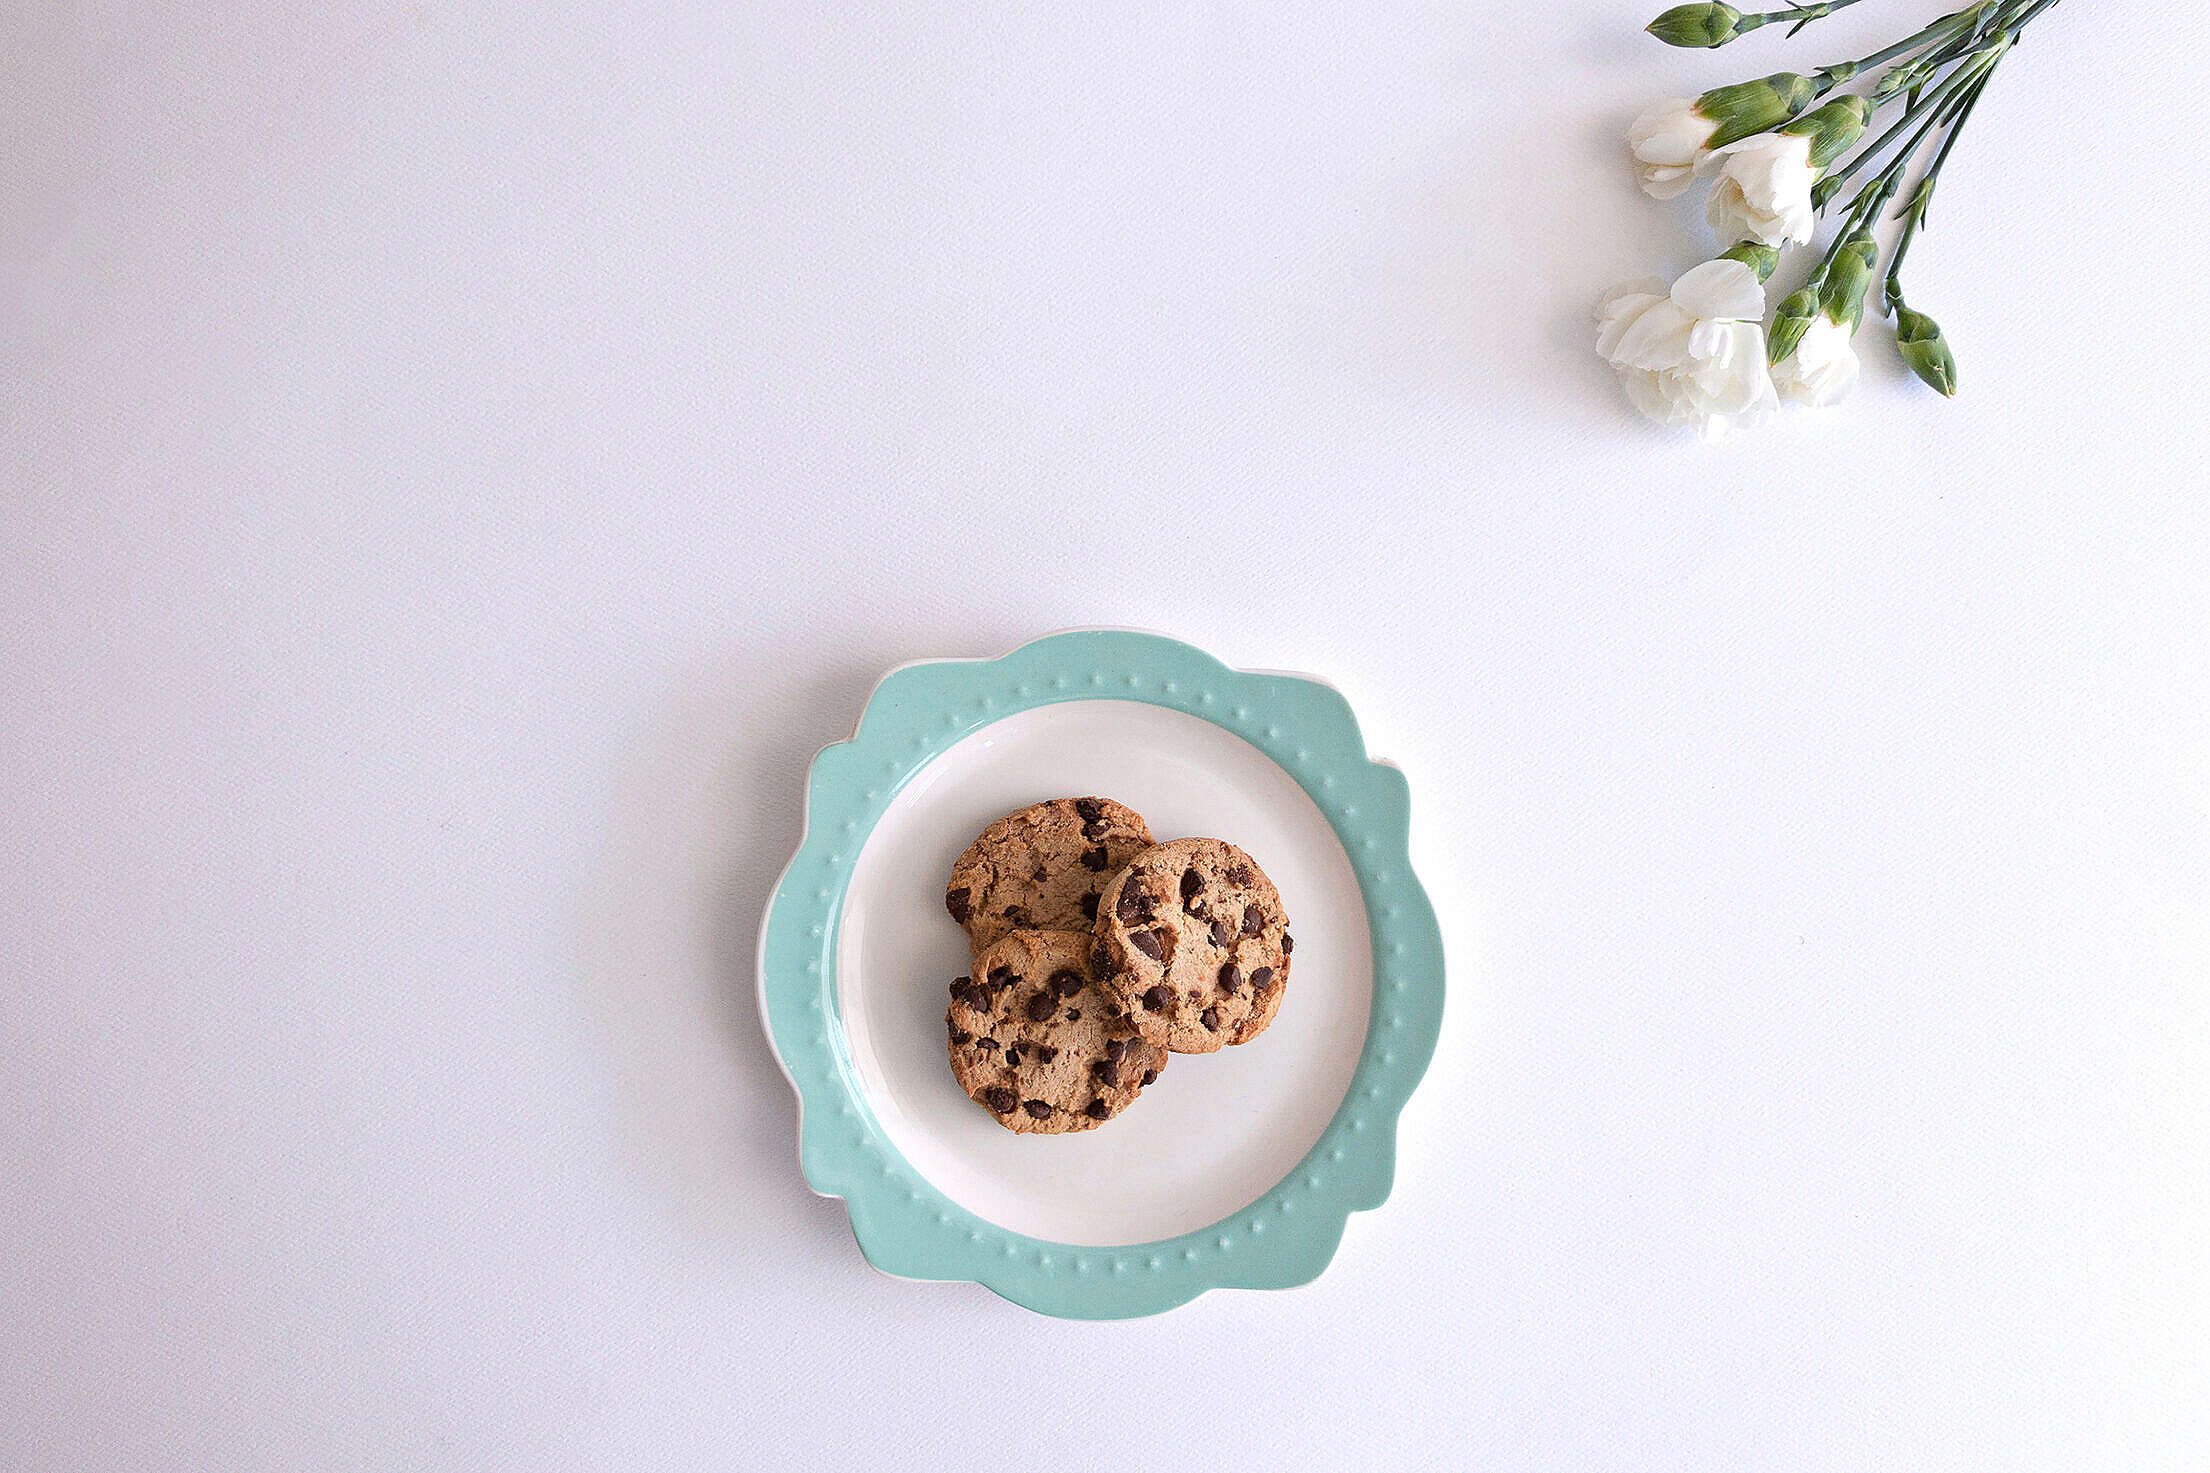 Cookies Served on a Vintage Plate with Flowers Free Stock Photo